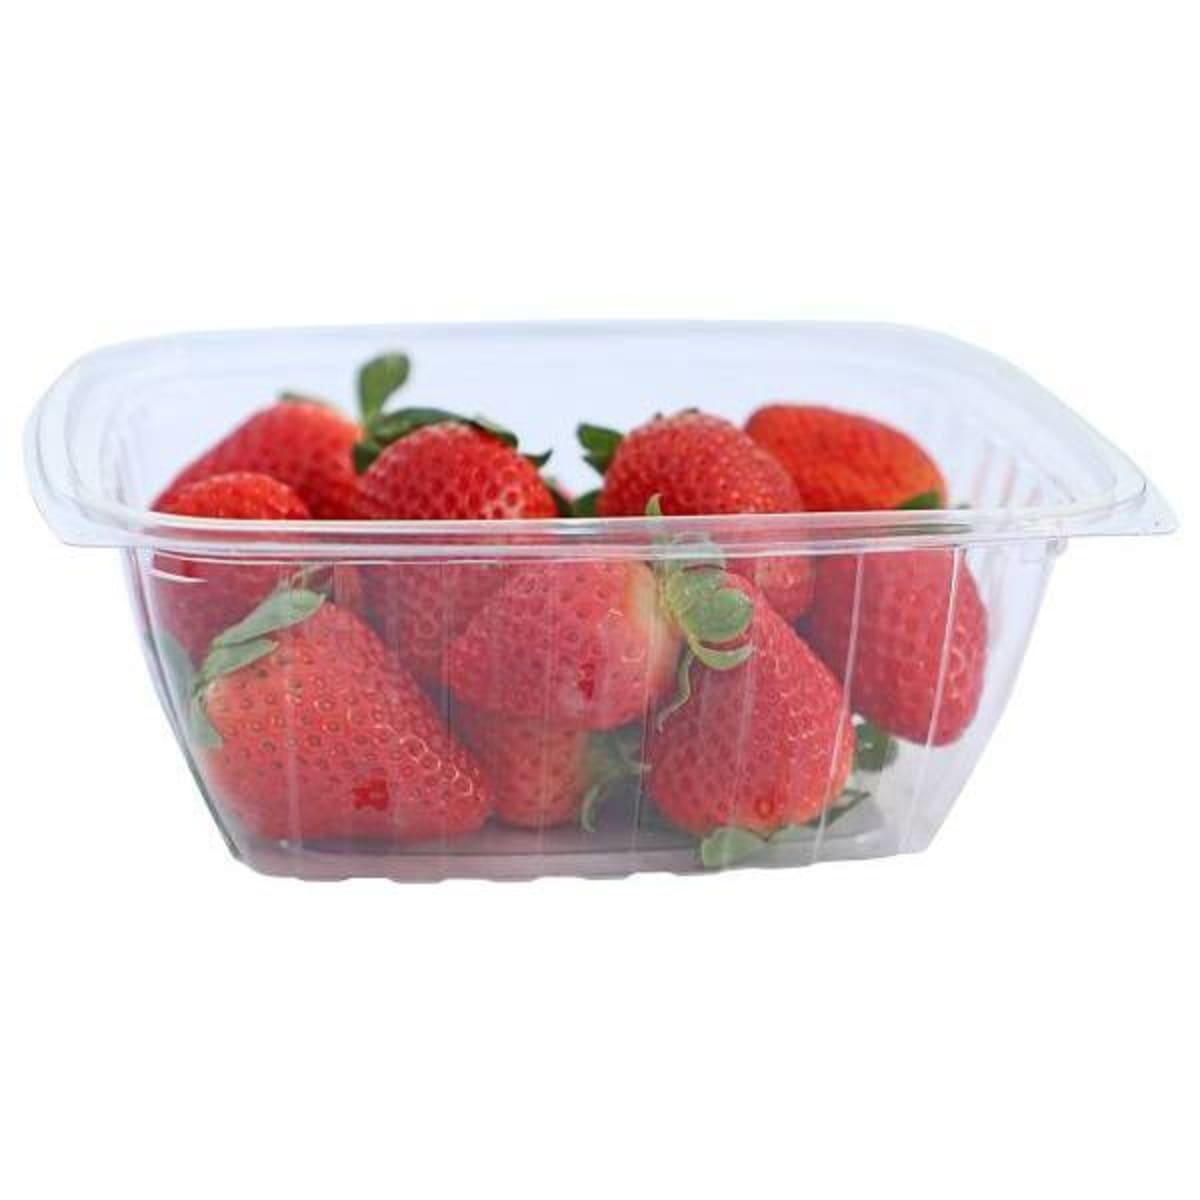 ChoiceHD 24 oz. Microwavable Translucent Plastic Deli Container